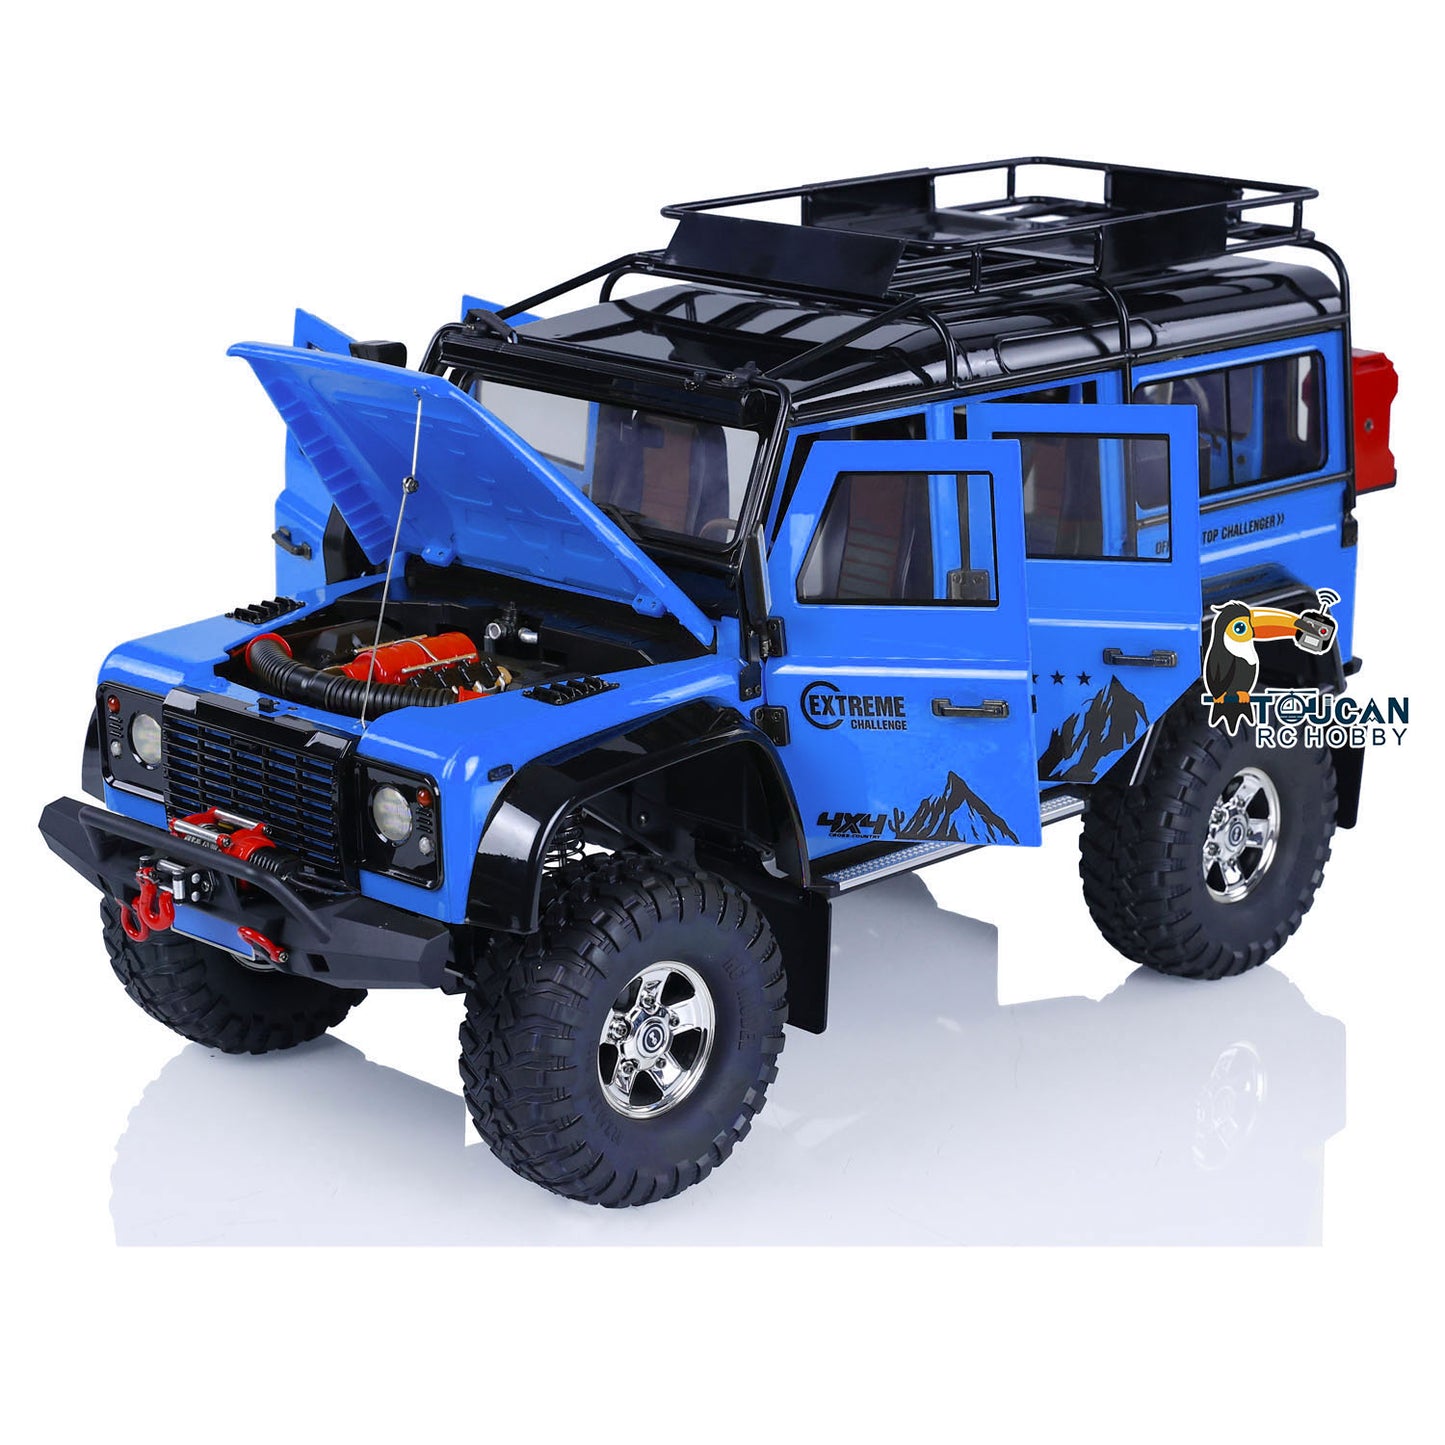 HG 1/10 RC Crawler Car 4x4 Off-road Vehicle P411 Lights Sound Radio System Smoking Motor Outdoor Remote Control Vehicle for